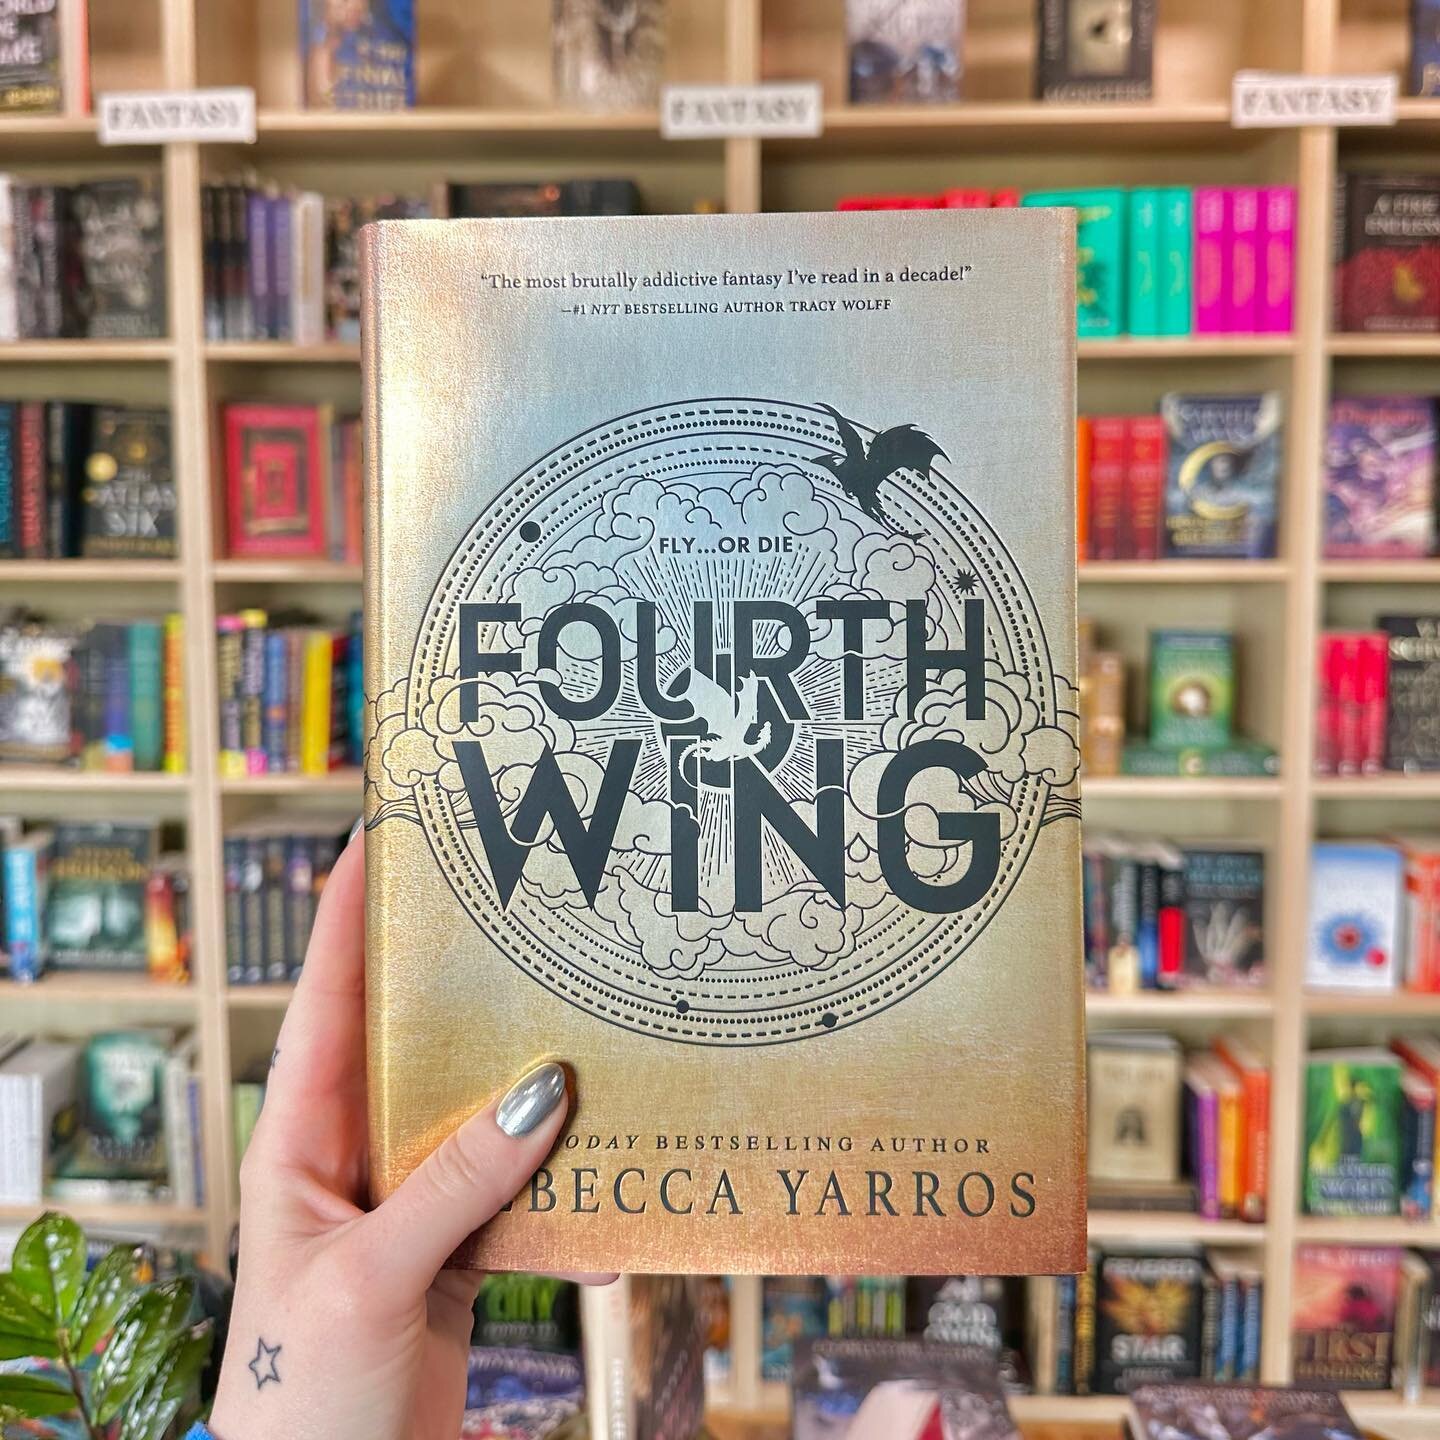 You&rsquo;ve heard about this book right?? The newest spicy fantasy romance that&rsquo;s sure to be the next ACOTAR?? And it has dragons??? Well if you haven&rsquo;t, just know we&rsquo;ve only heard raving, &ldquo;this is the best book ever&rdquo; r